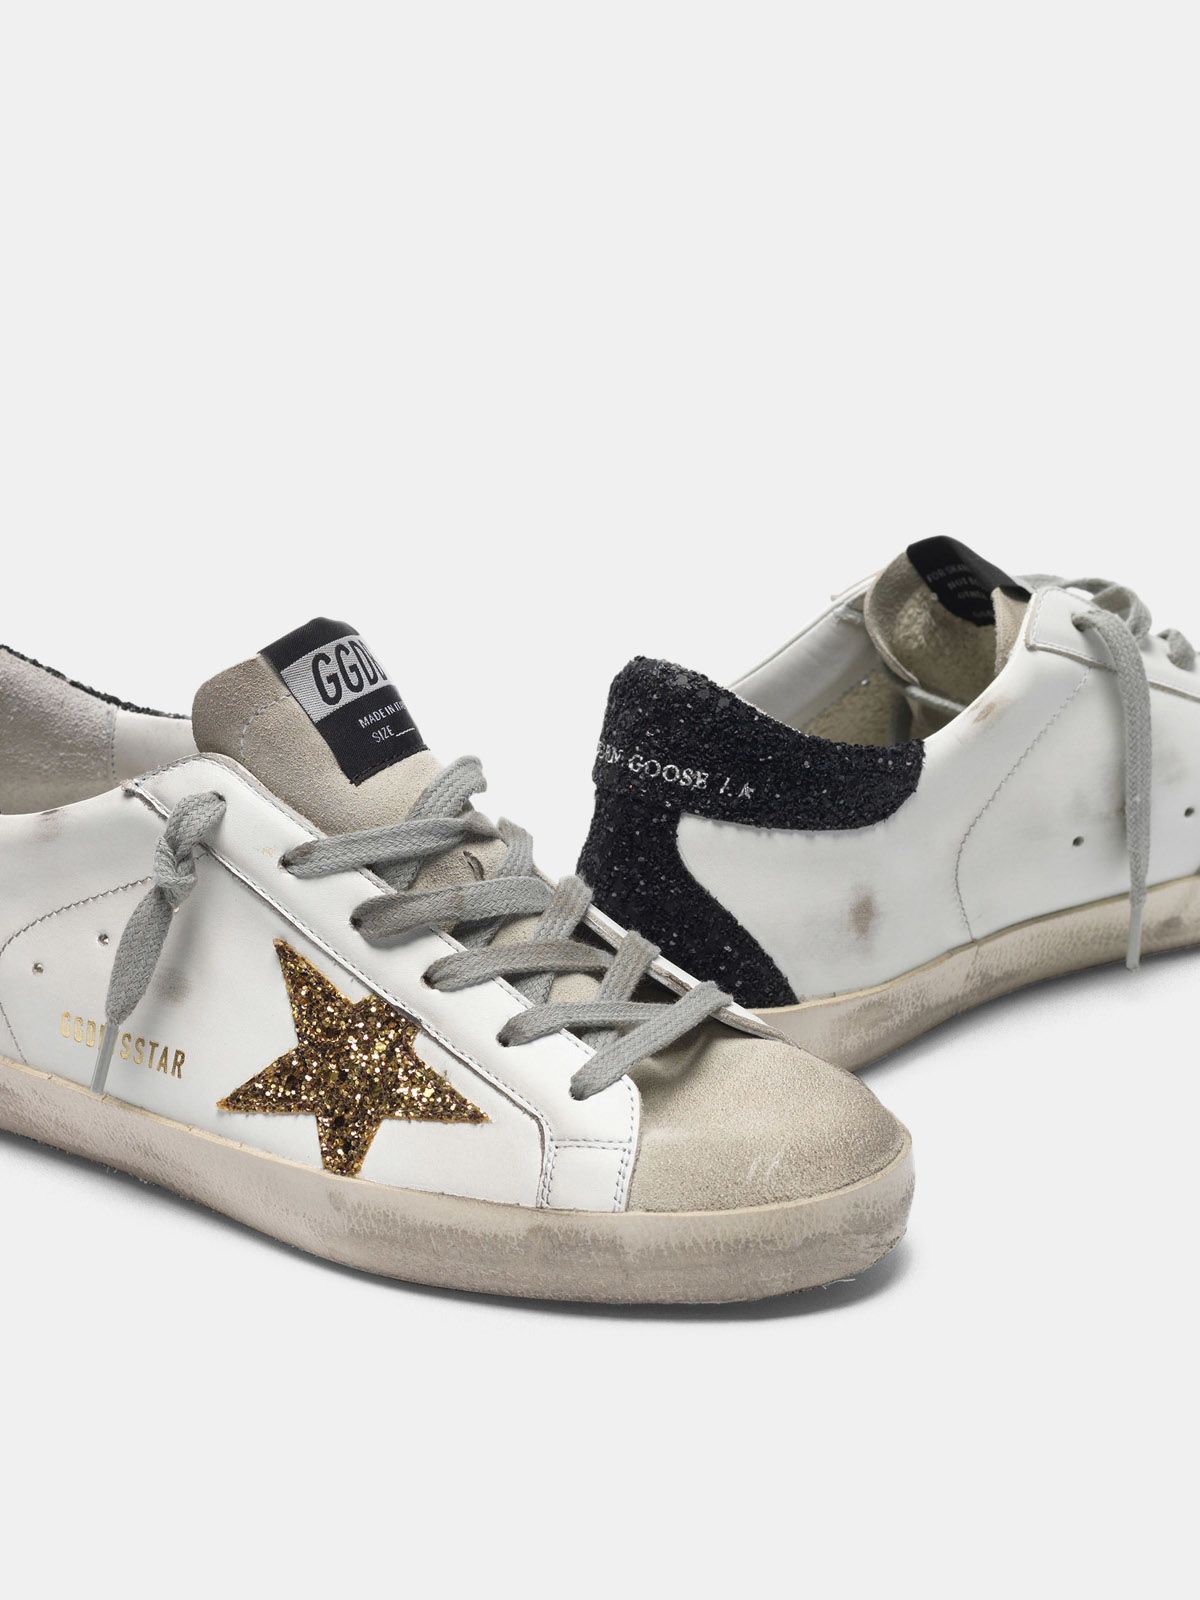 Super-Star sneakers with gold star and glittery black heel tab | Golden Goose